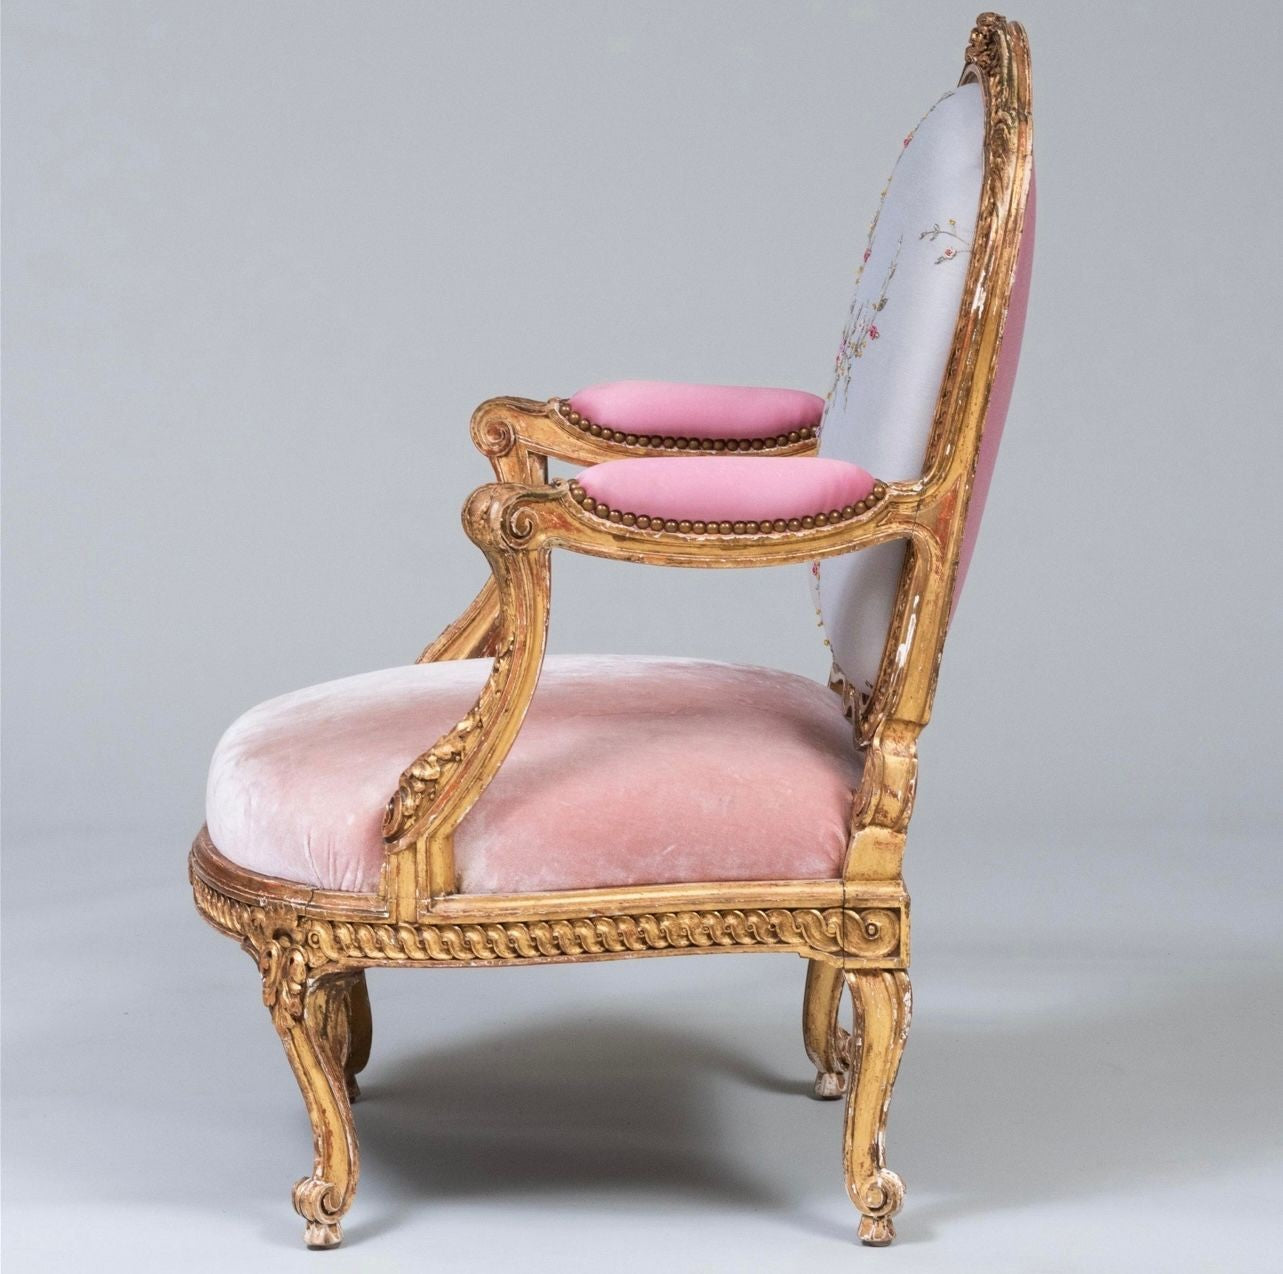 A Louis XV Style Carved Giltwood Armchair, 19C